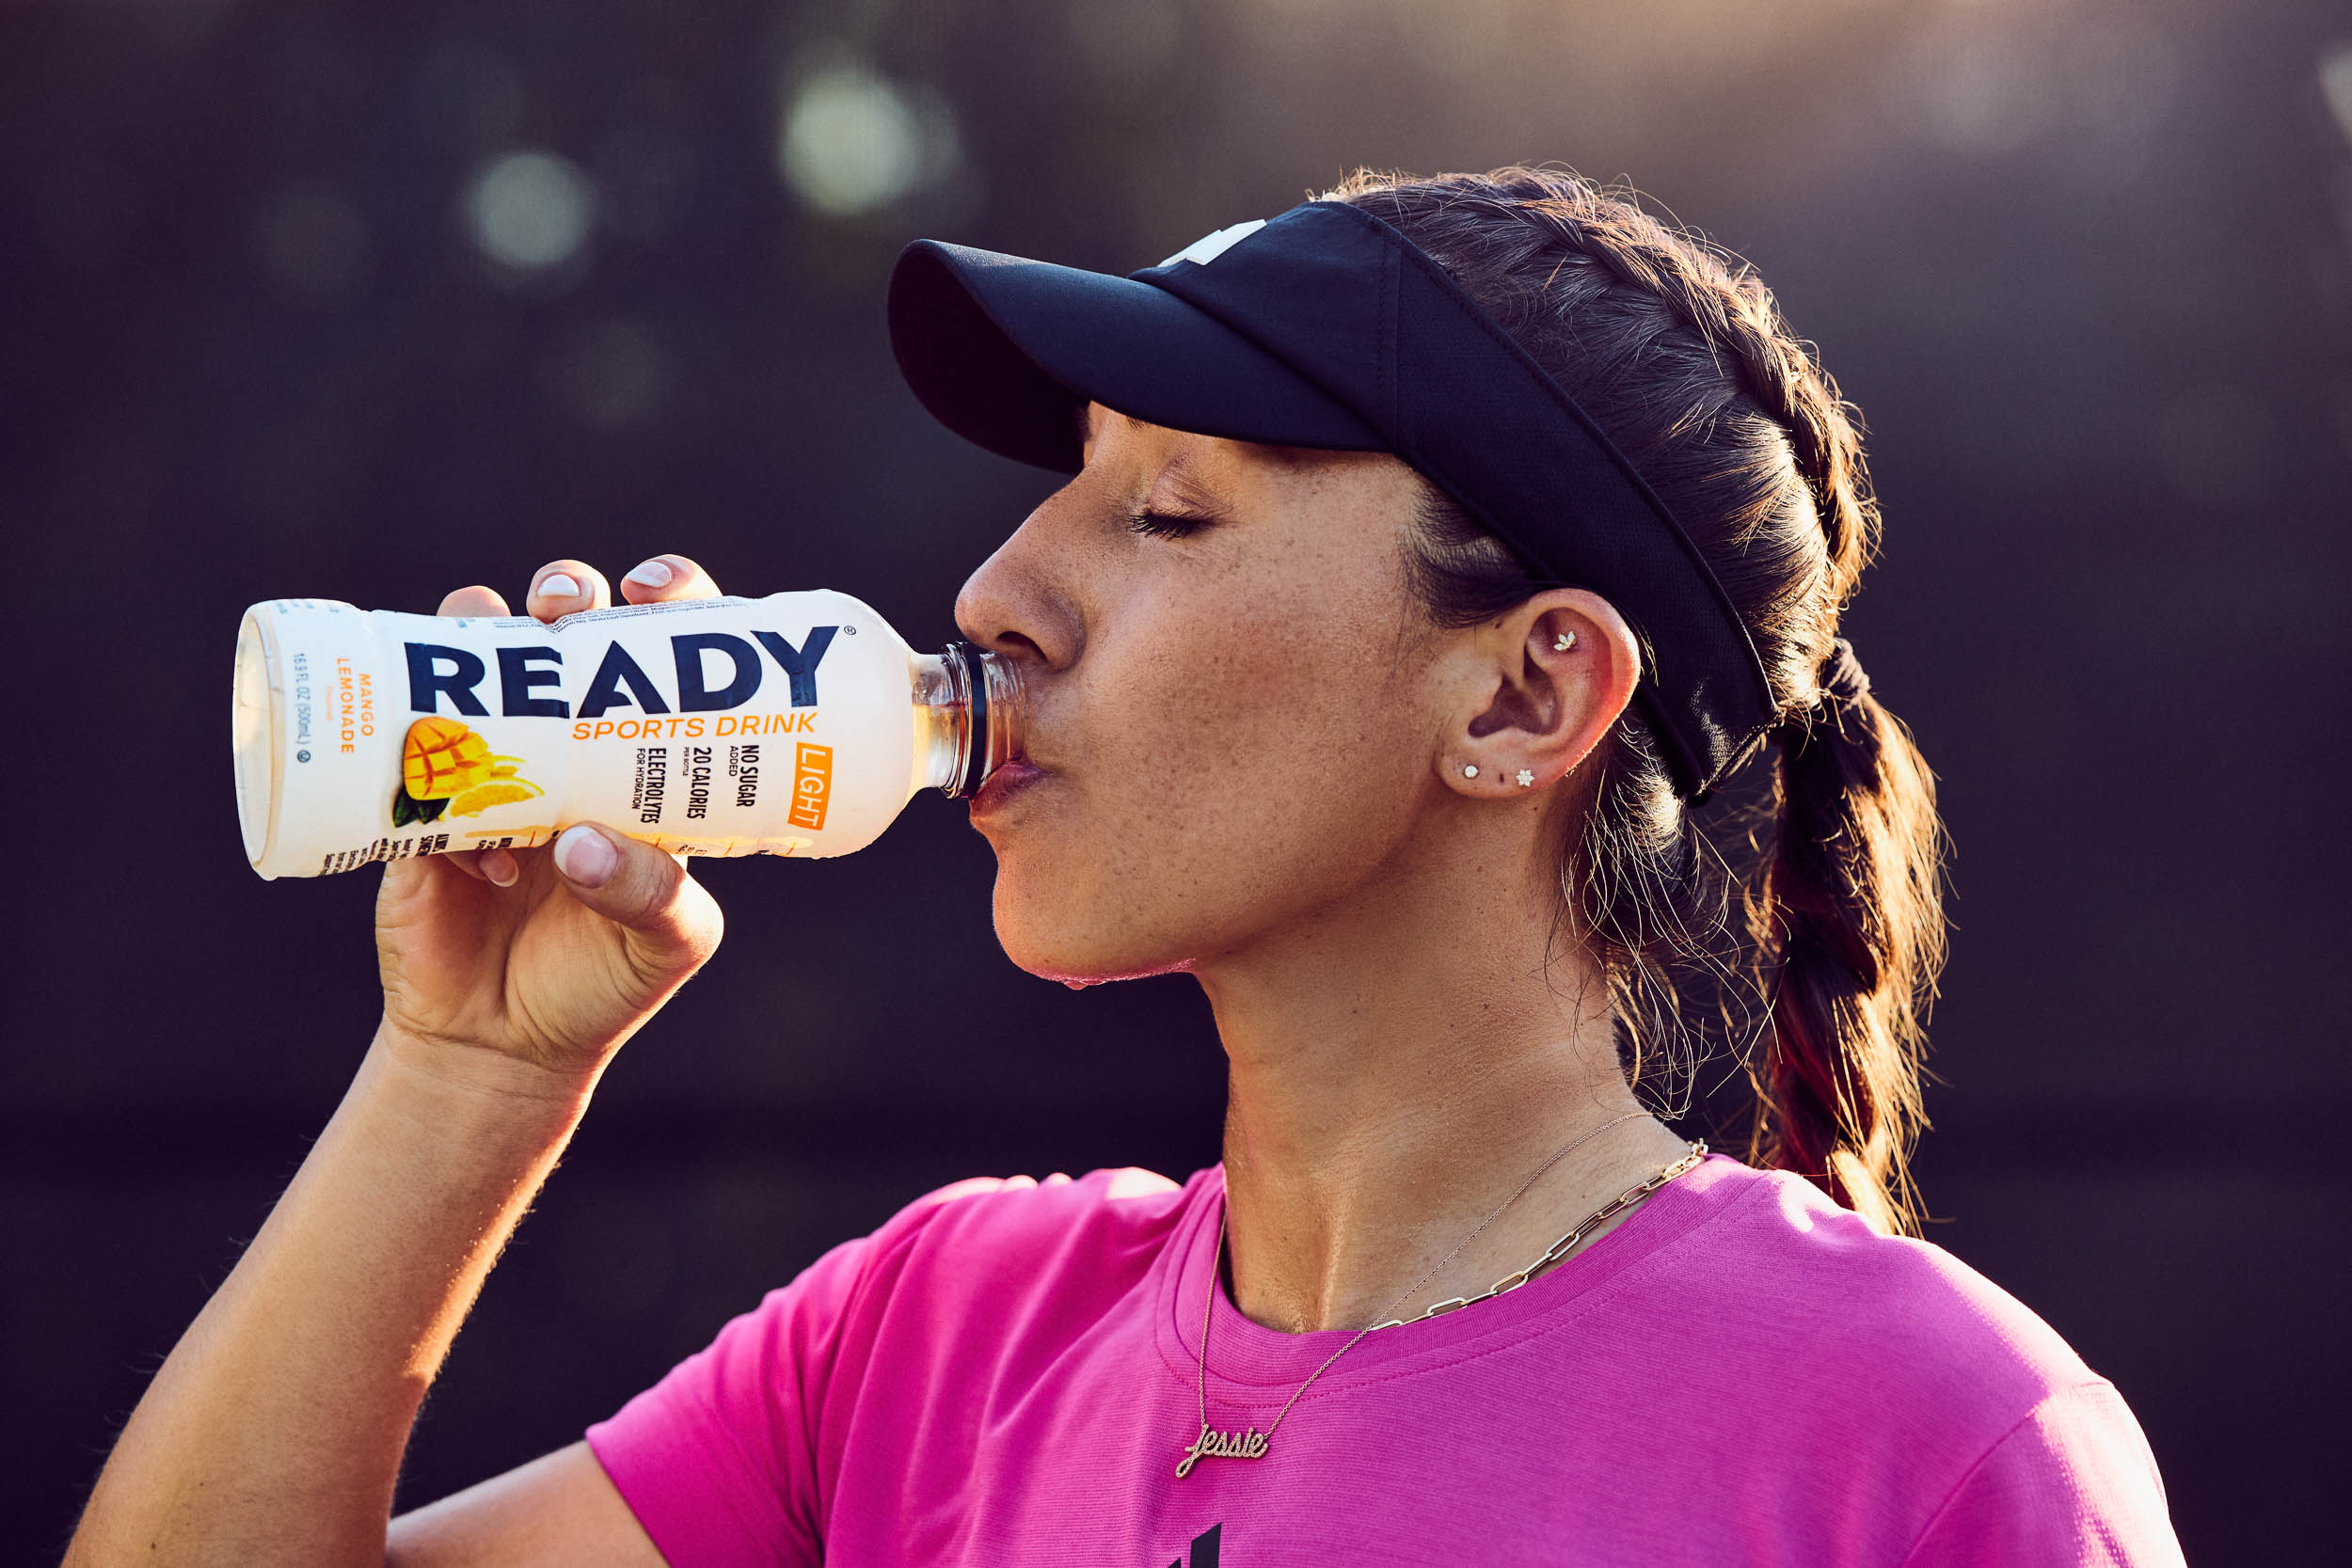 PROFESSIONAL TENNIS CHAMPION JESSICA PEGULA PHOTOGRAPHY BY COMMERCIAL ADVERTISING PHOTOGRAPHER IN FLORIDA FOR SPORTS DRINK BRAND READY